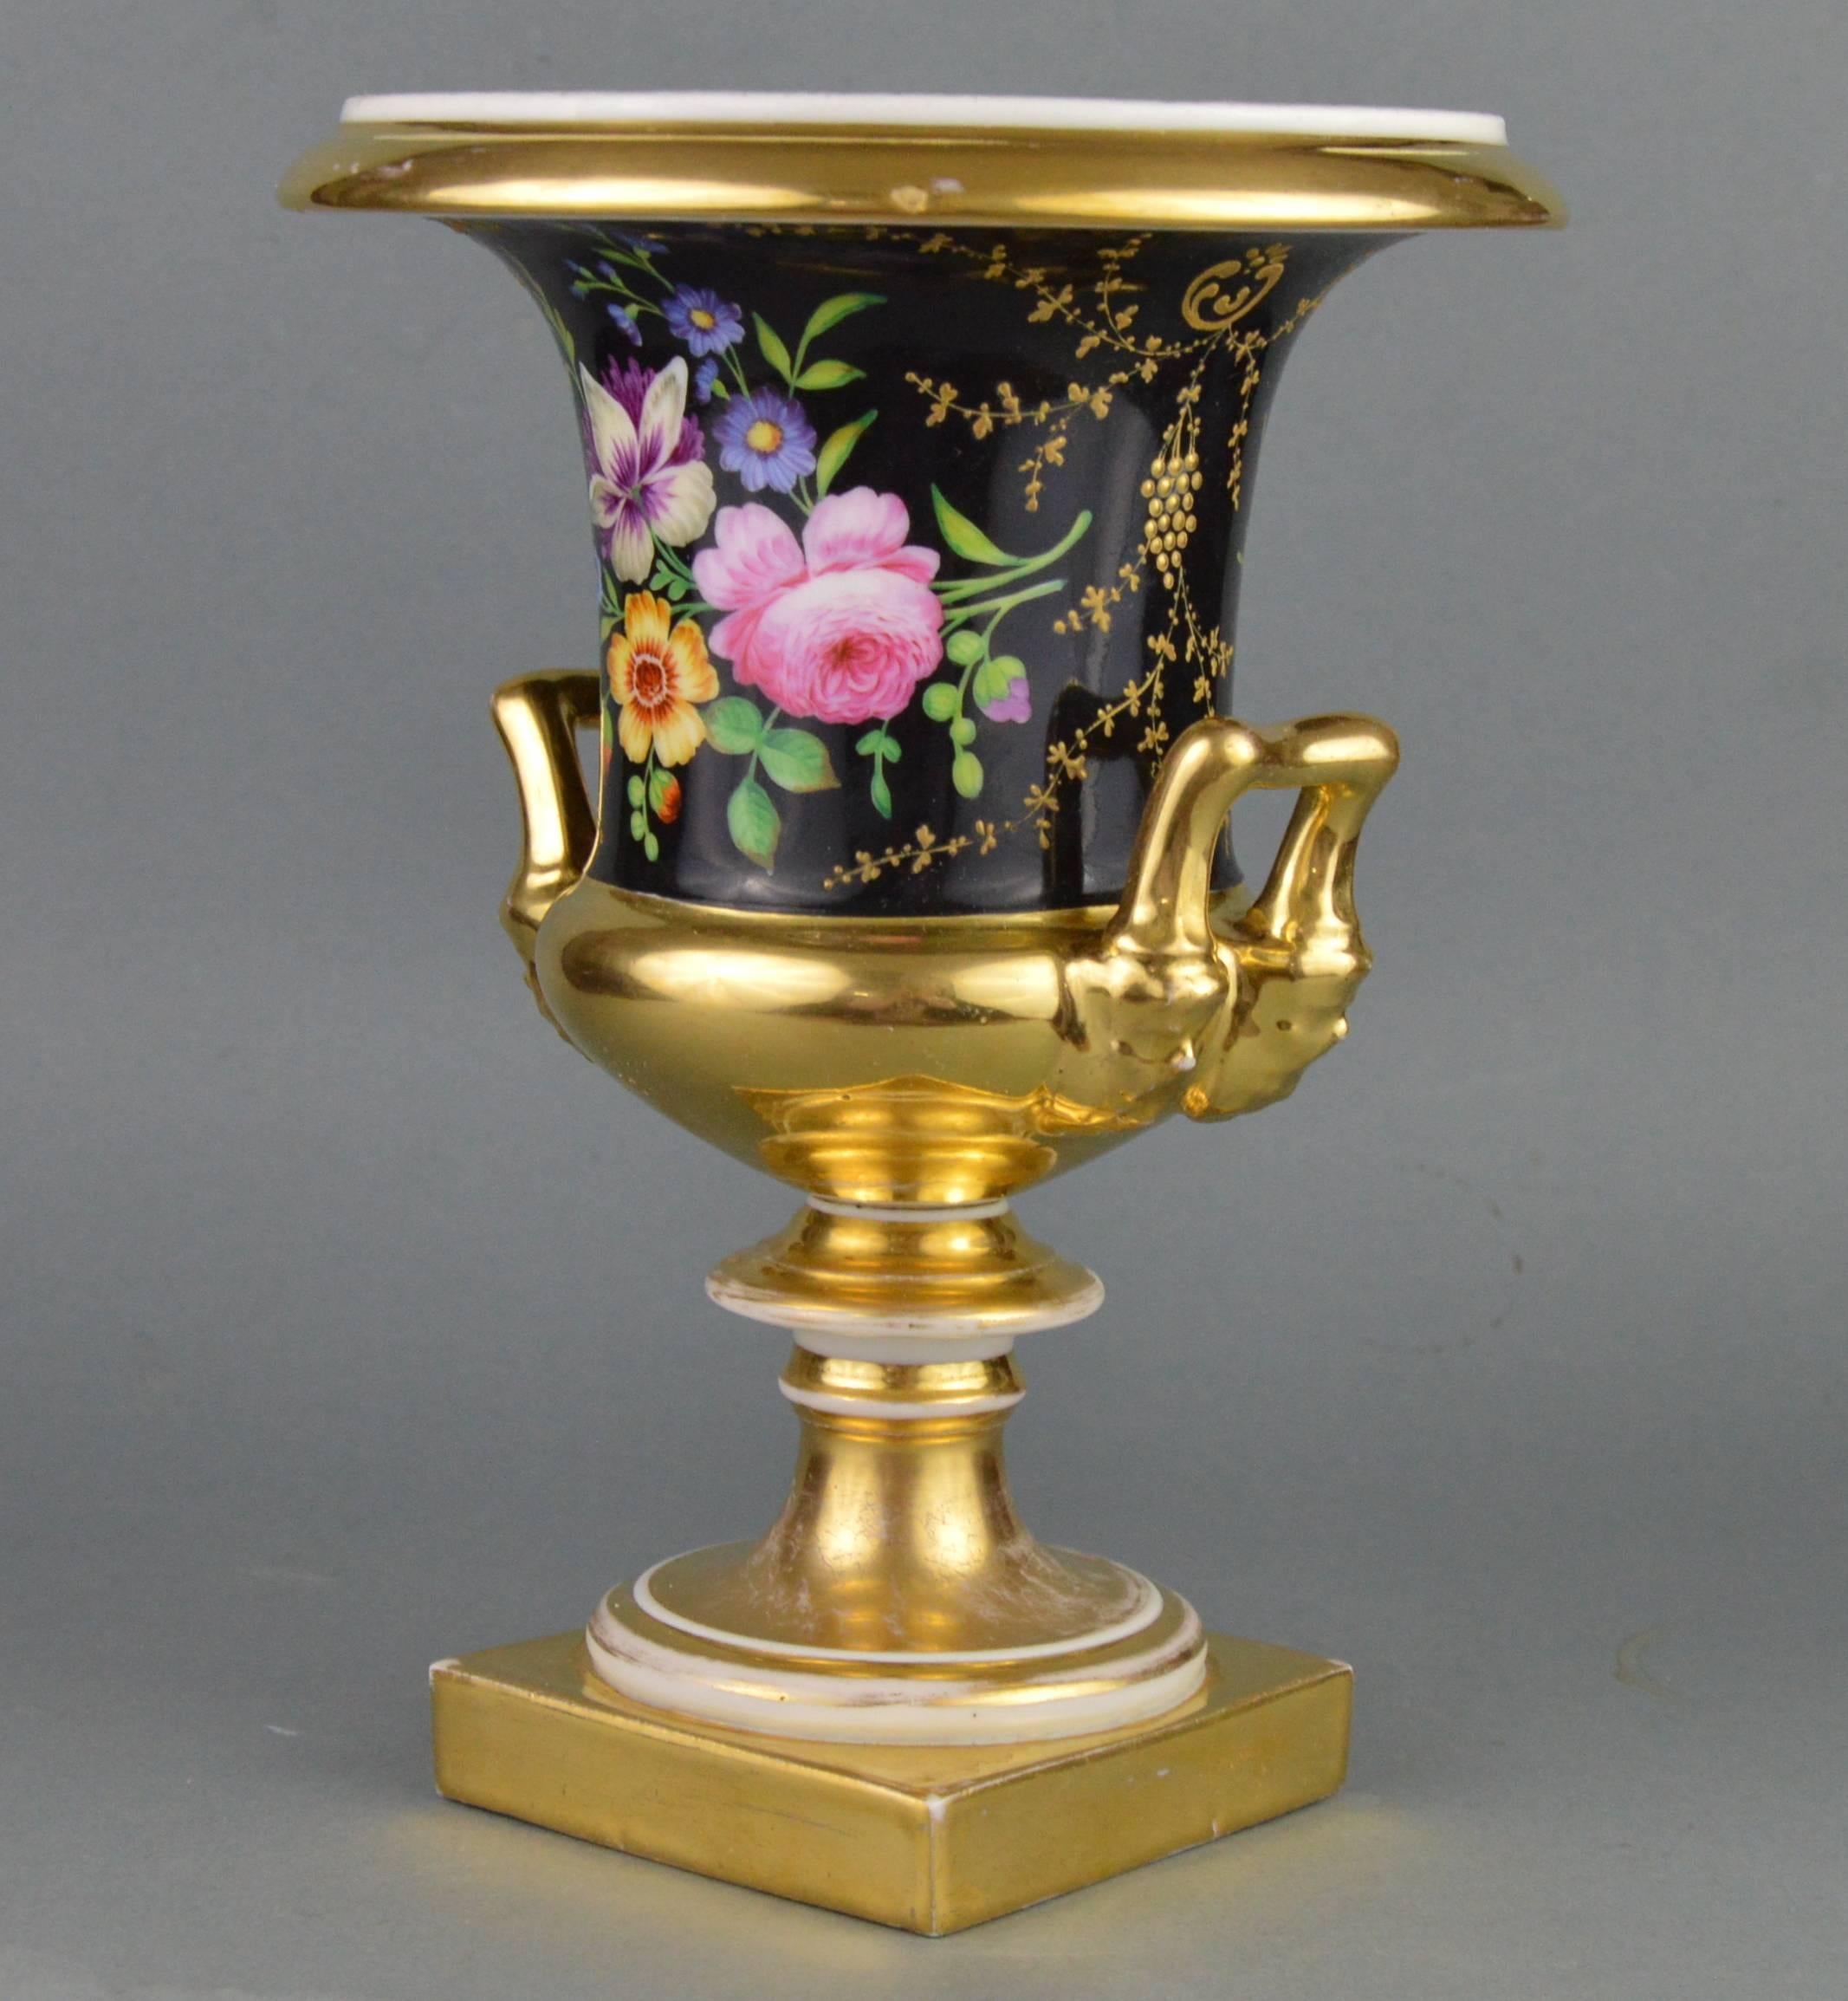 Mid-19th Century Medici Porcelain Vase Hand-Painted Flower Ornamented Decoration, 1820-1840